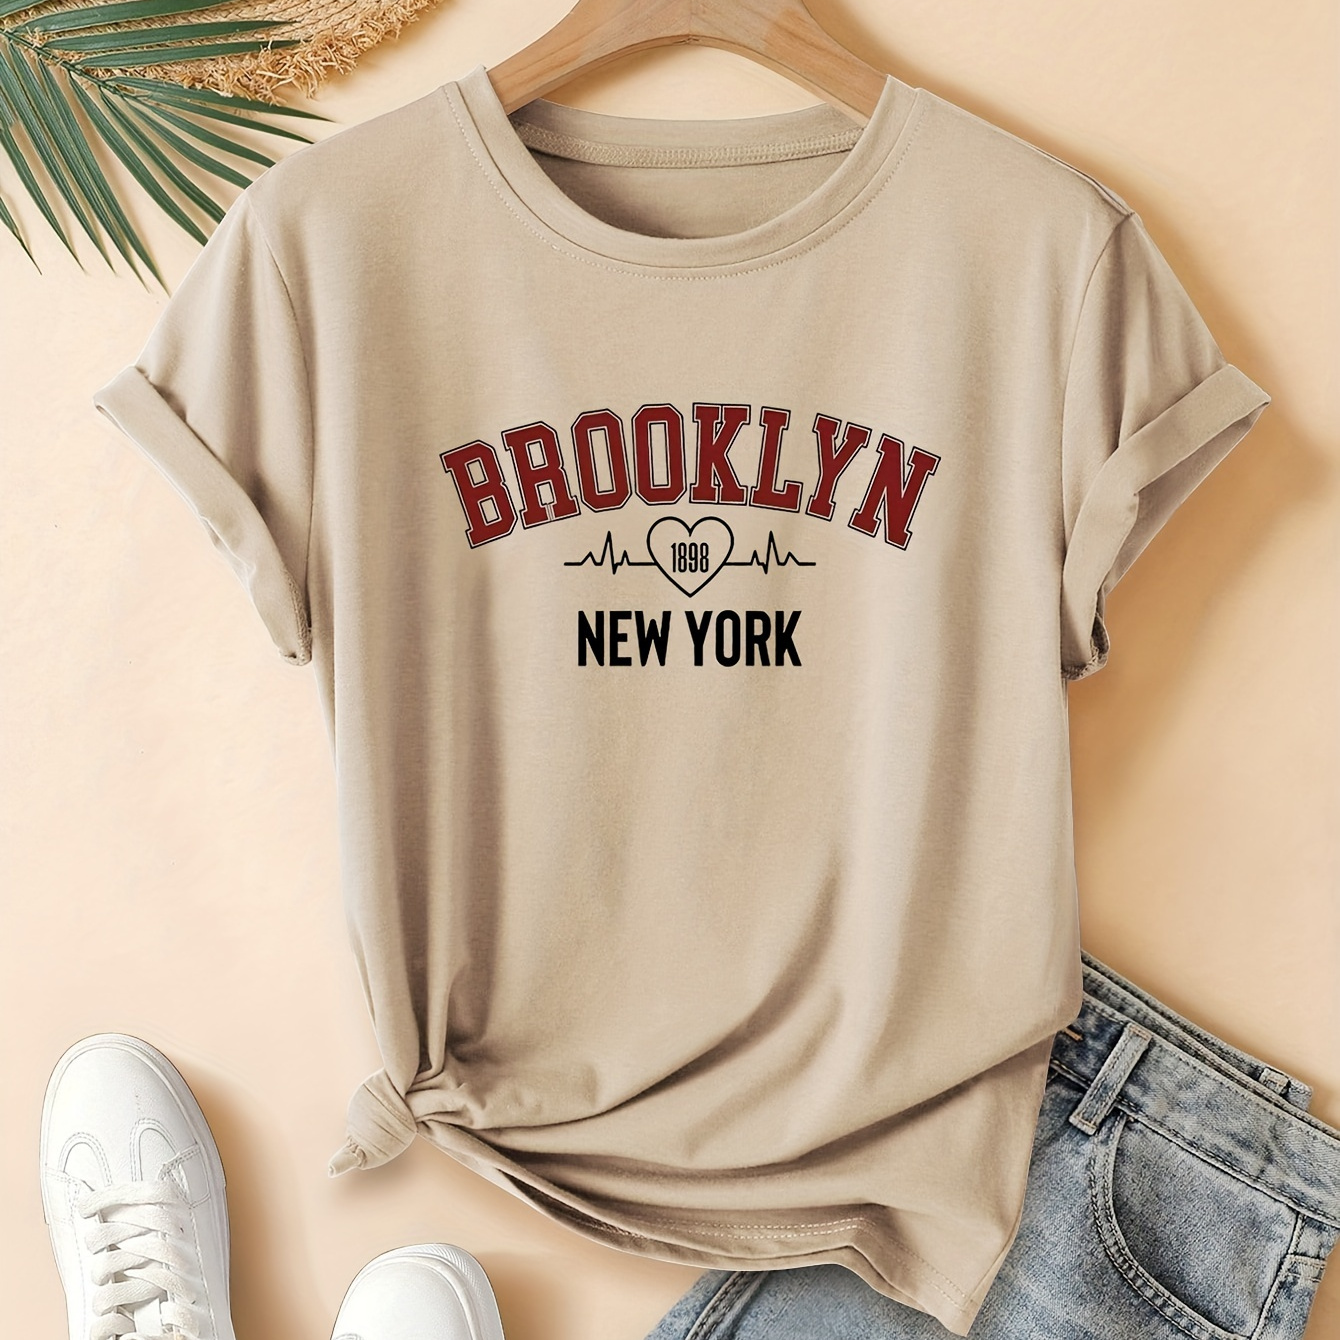 

Women's Casual Vintage Style T-shirt With "brooklyn New York" Print, Short Sleeve, Round Neck, Summer Sports Fashion Top In Apricot